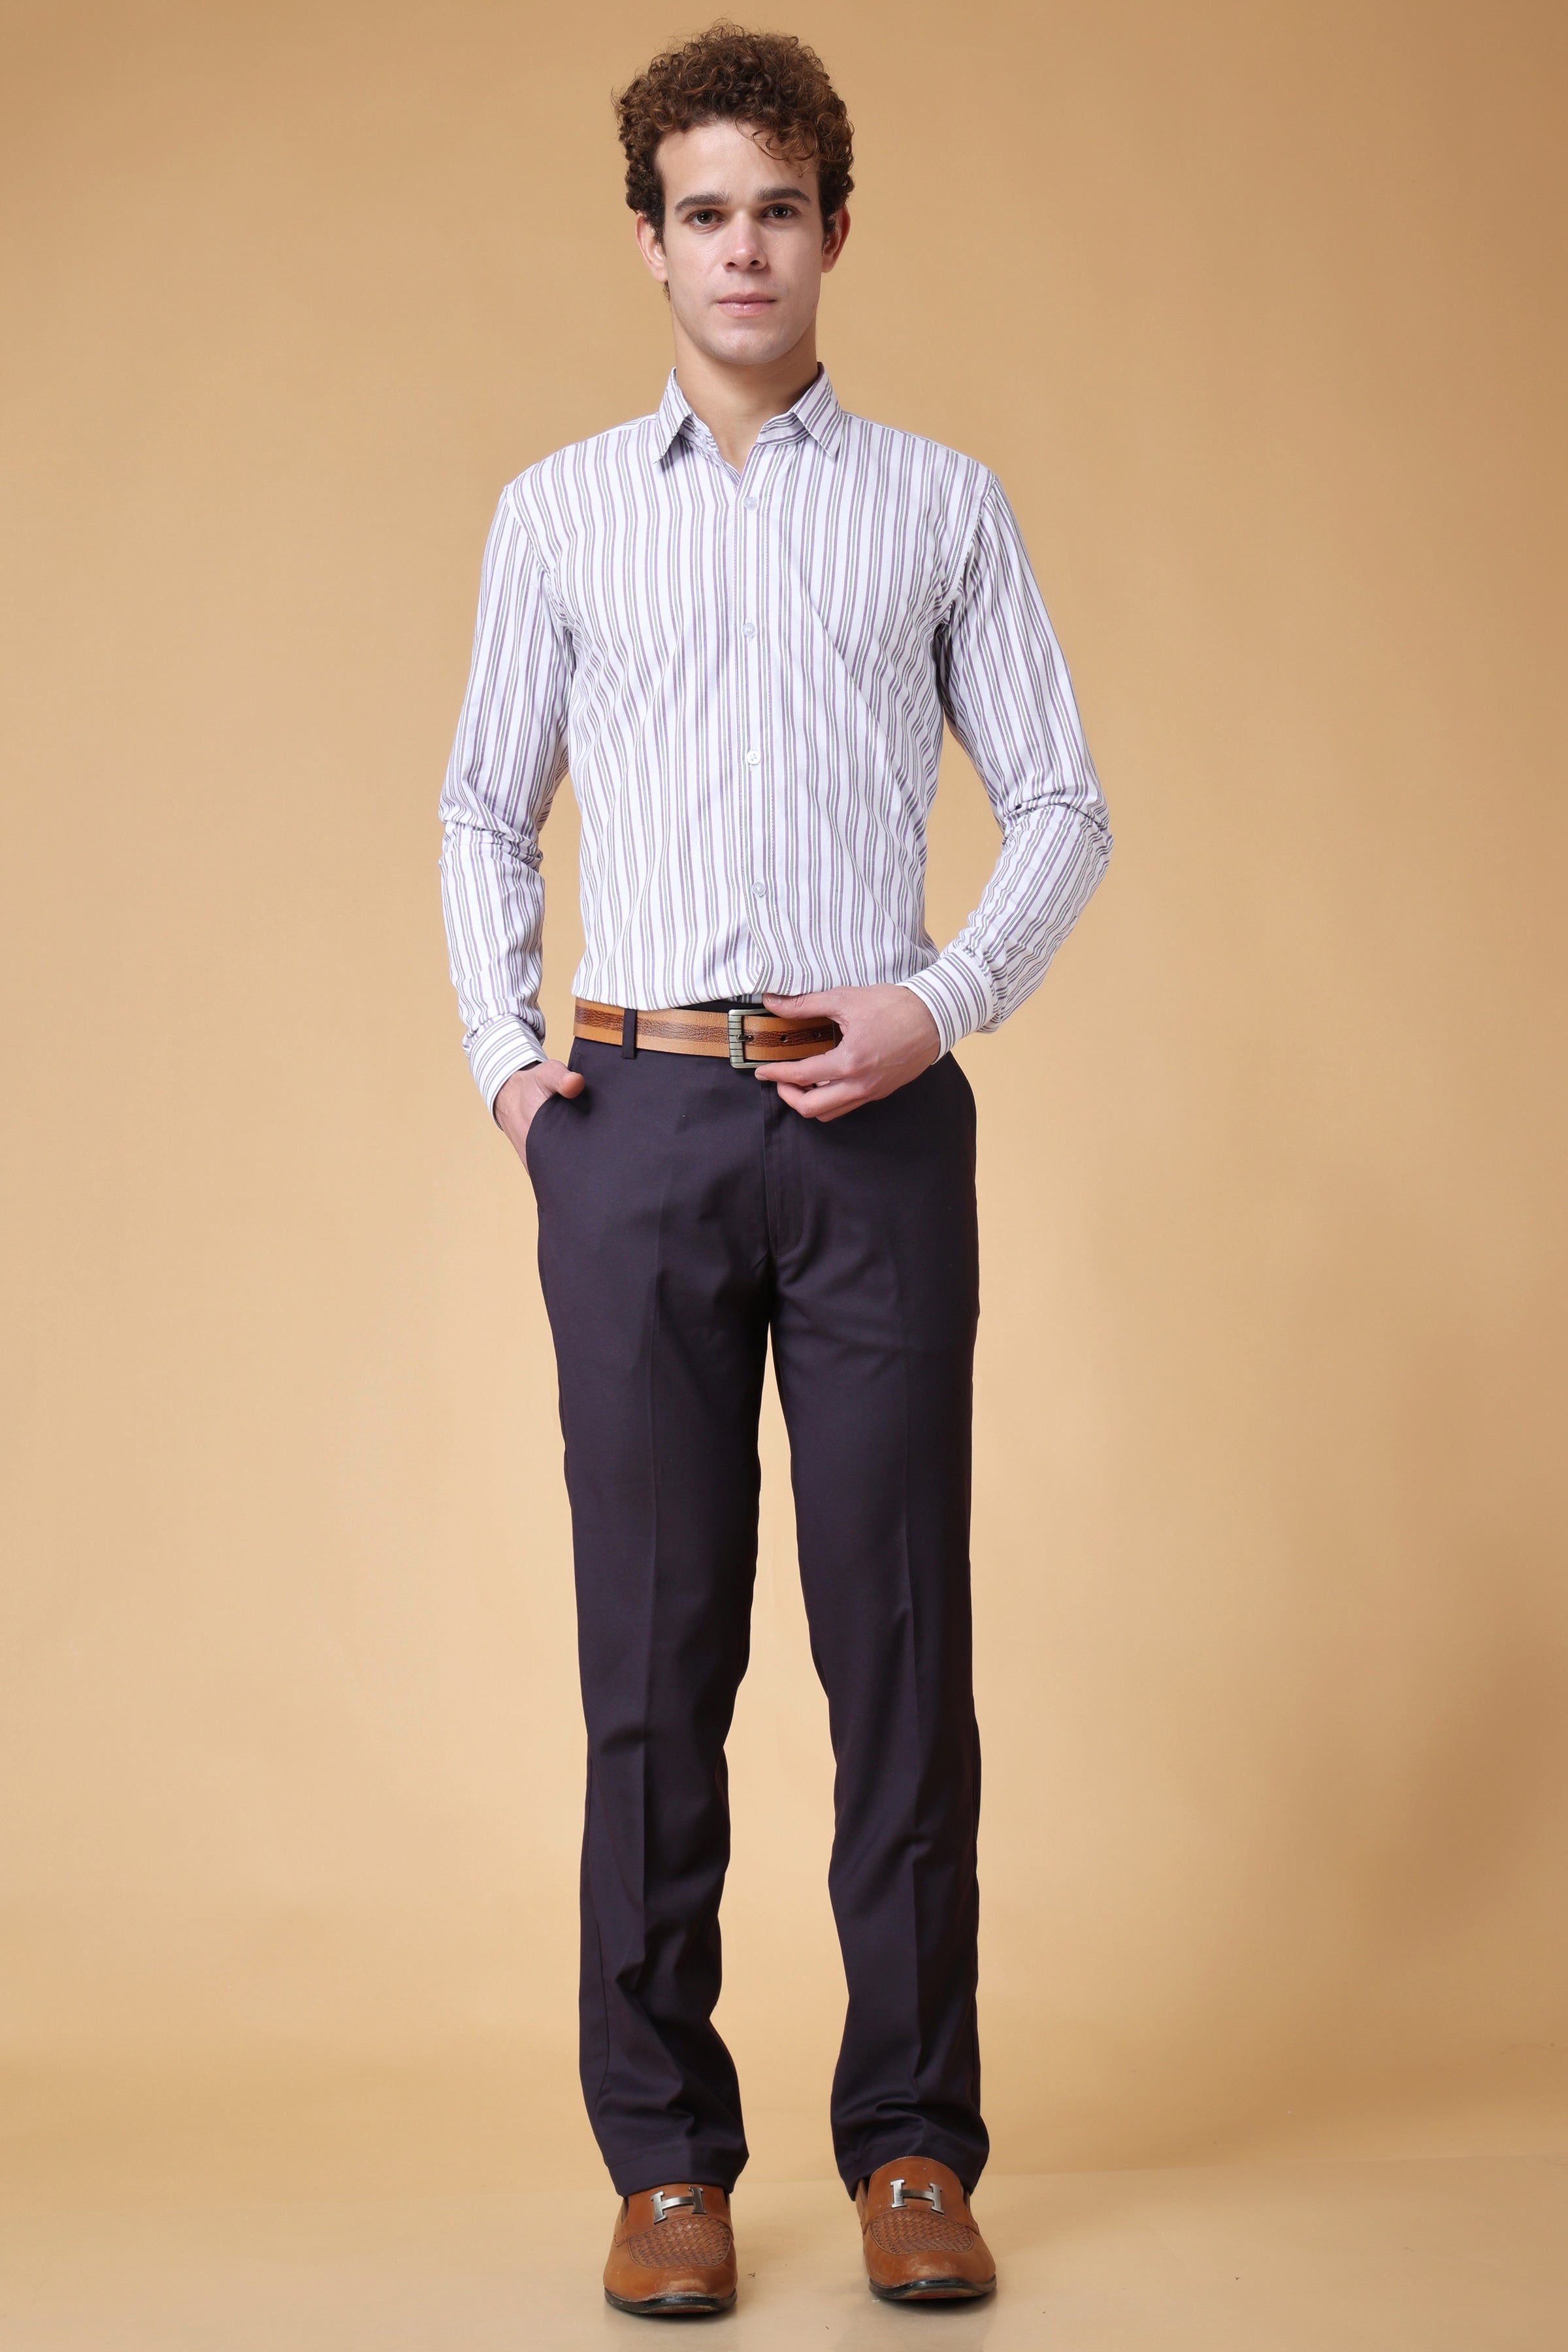 What color of pants should I wear with a tan shirt? - Quora